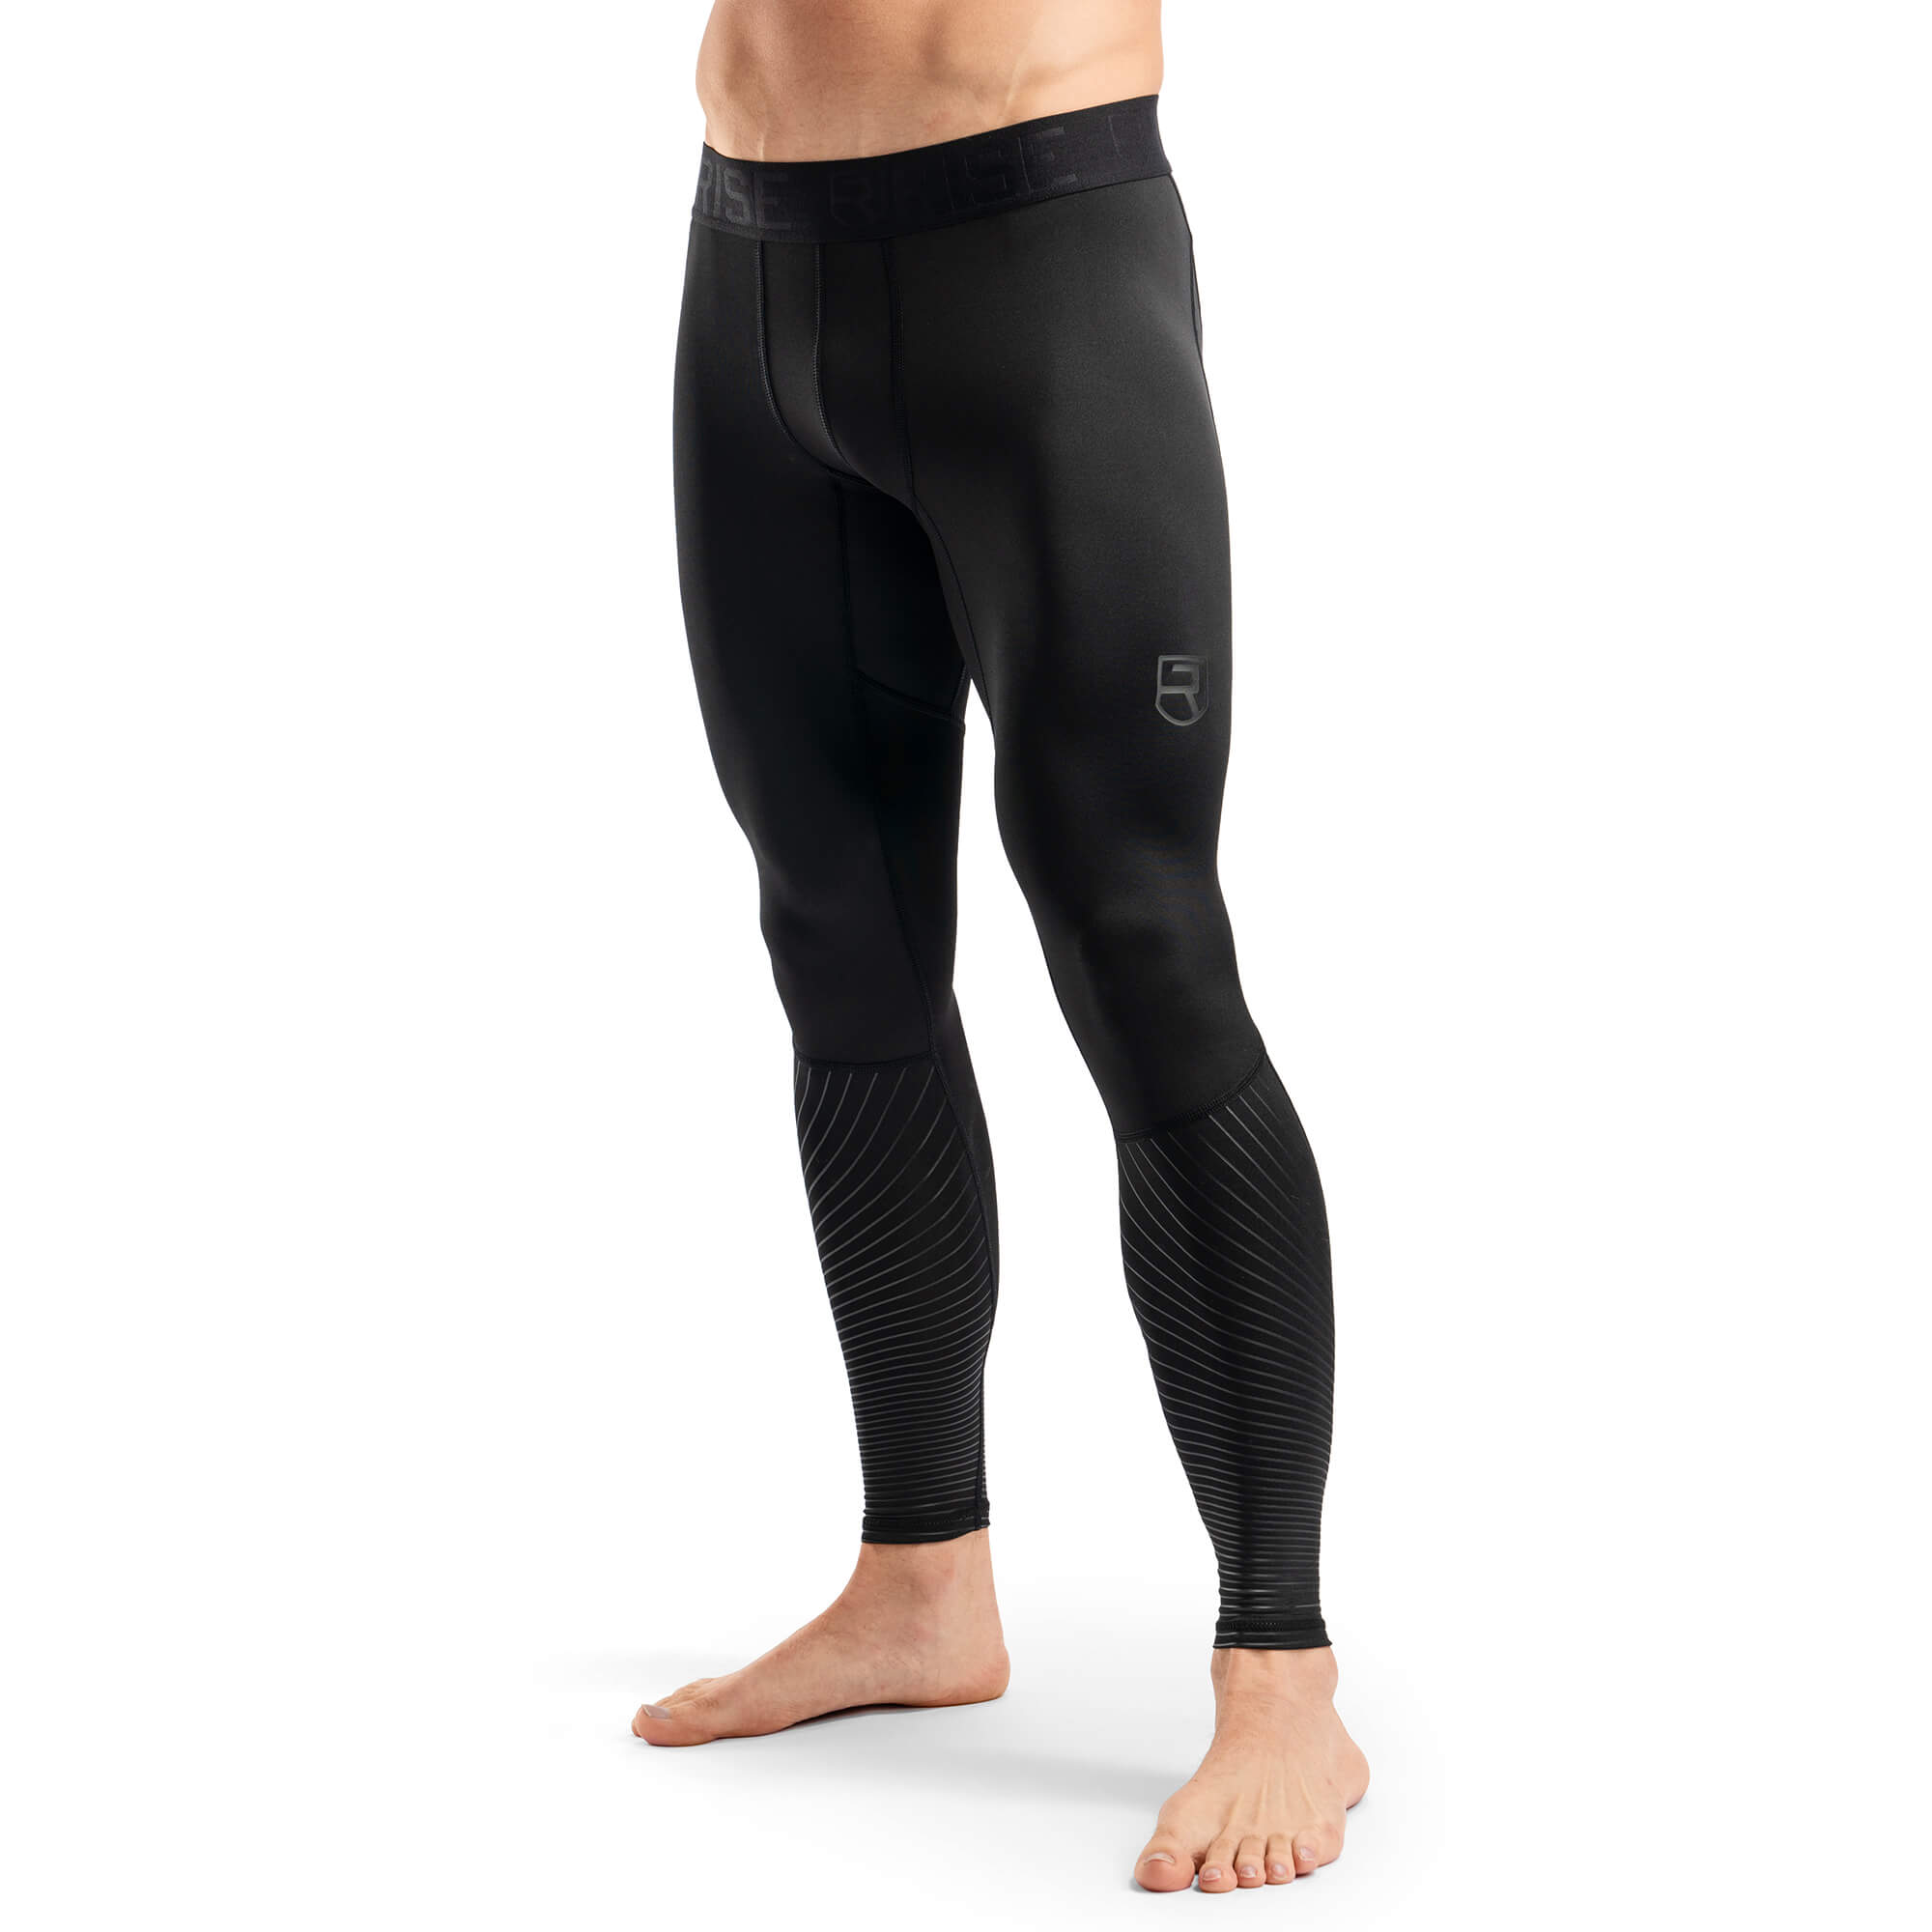 Active Dry Compression Pants - Black - Rise Canada